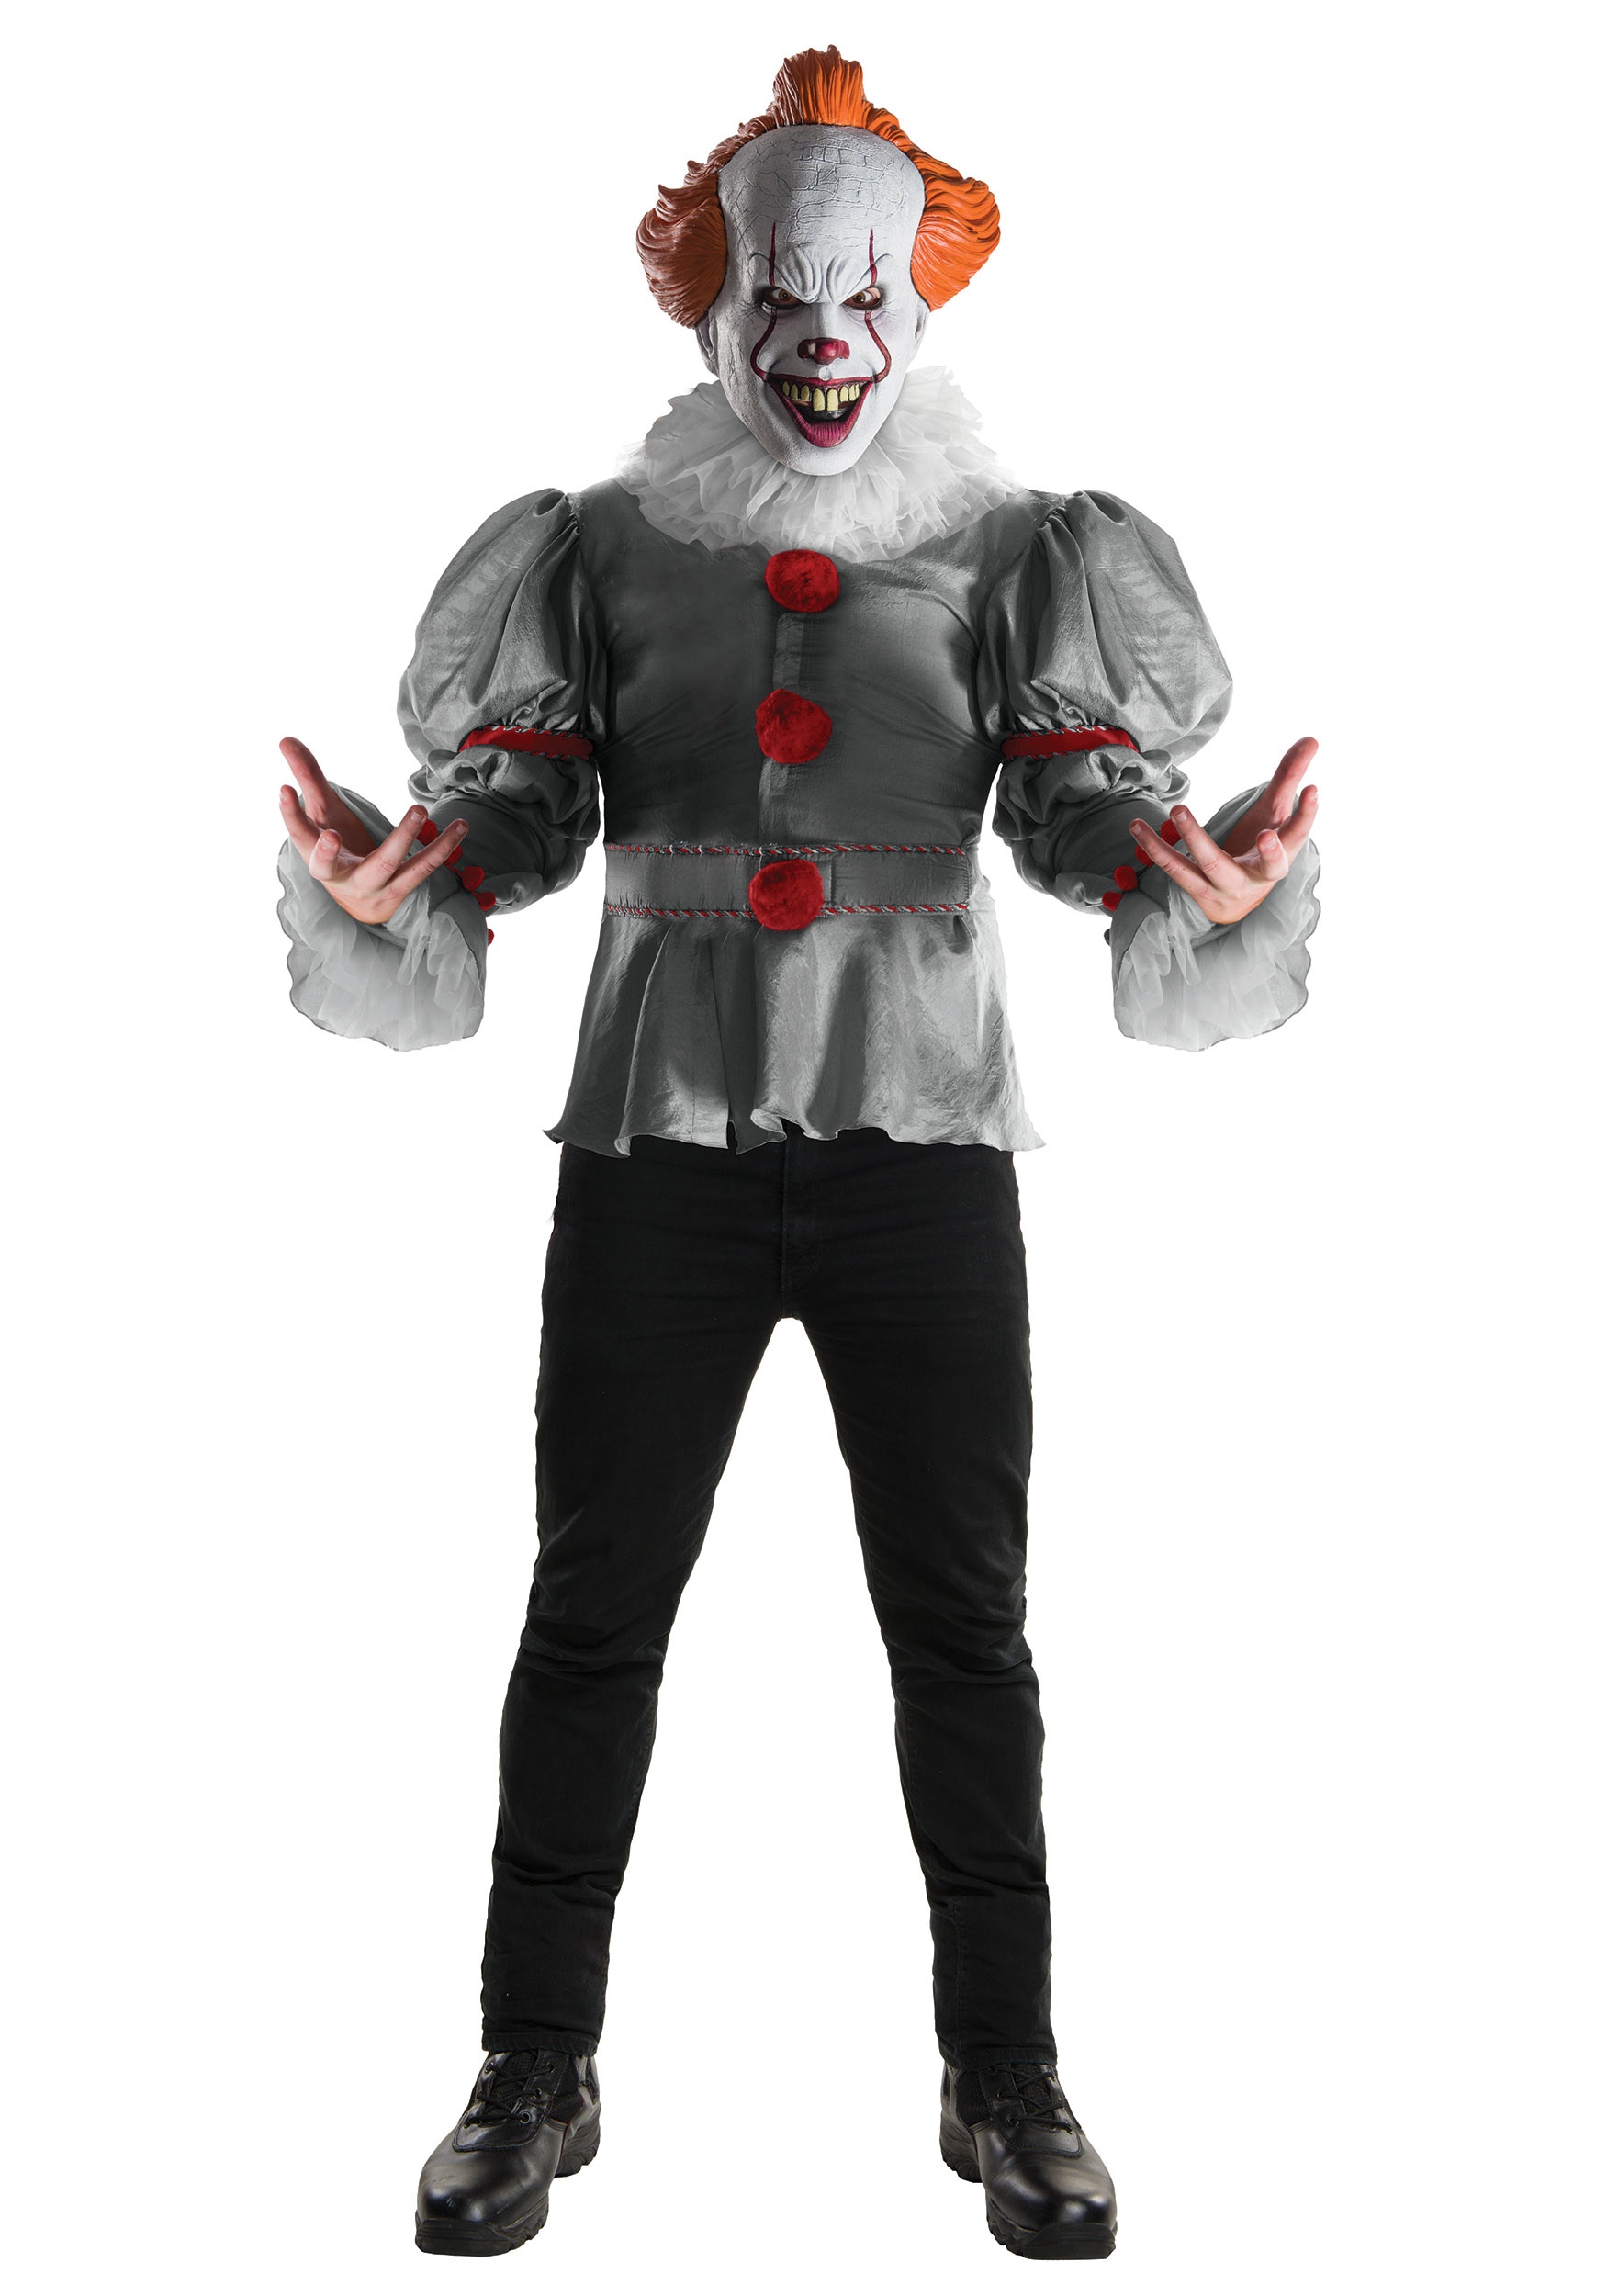 Image of Deluxe IT Movie Pennywise Costume for Adults ID RU820859-XL